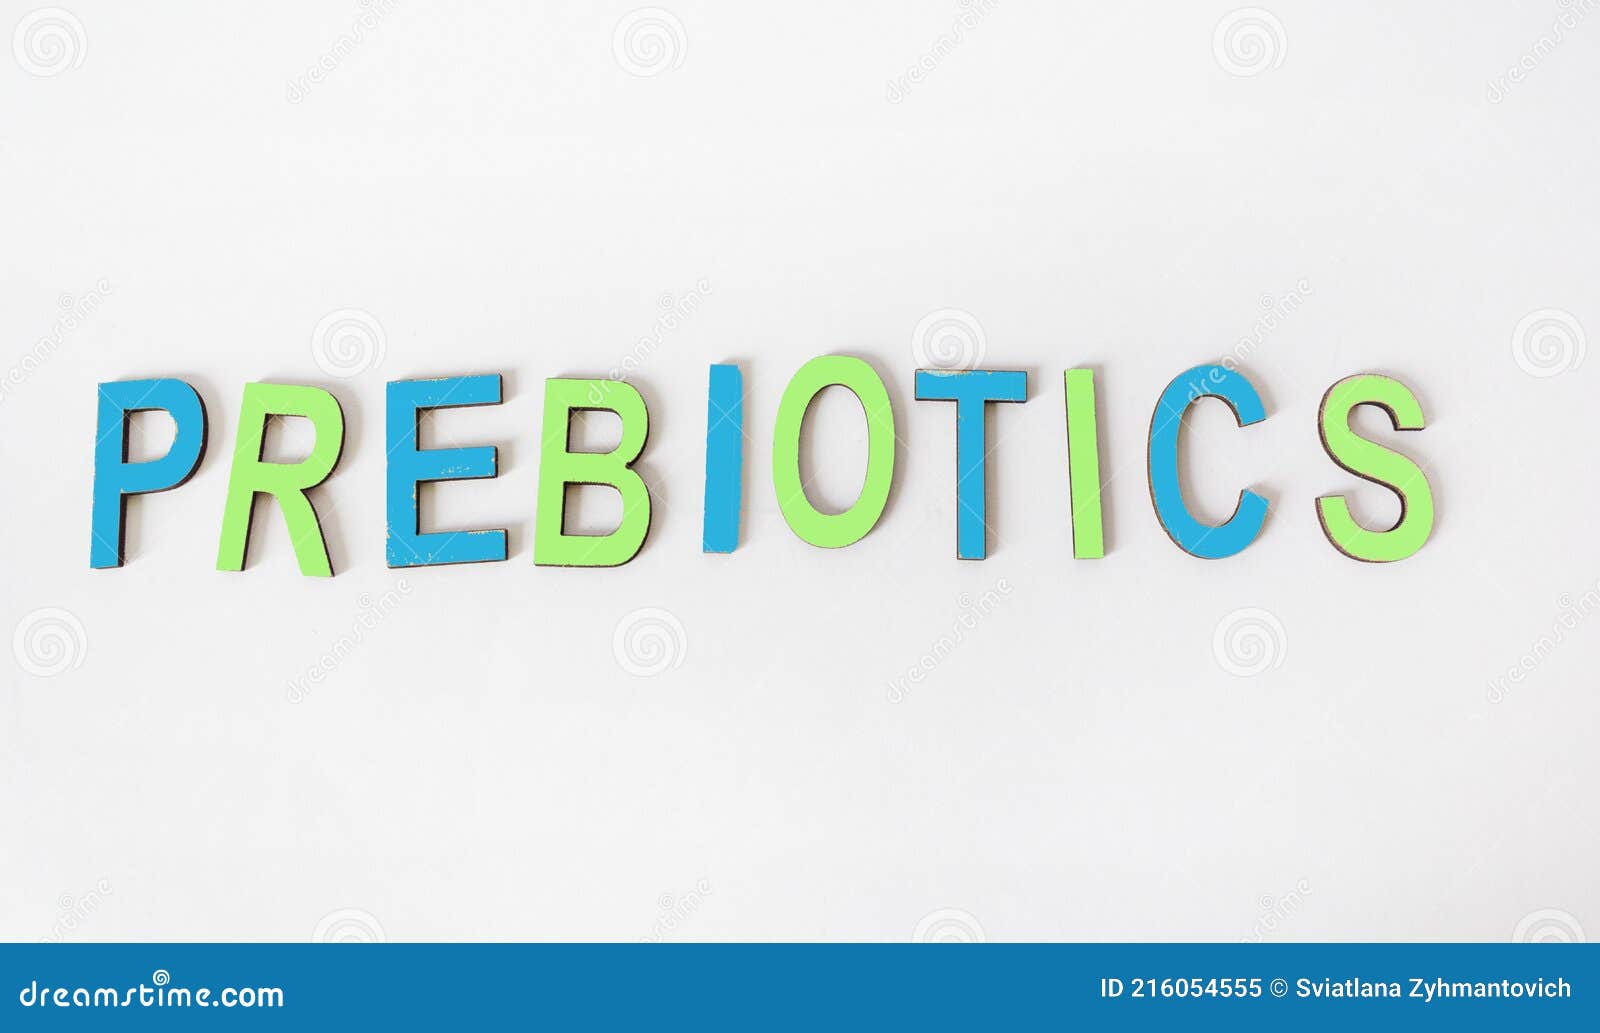 the word prebiotics is written in colored wooden letters